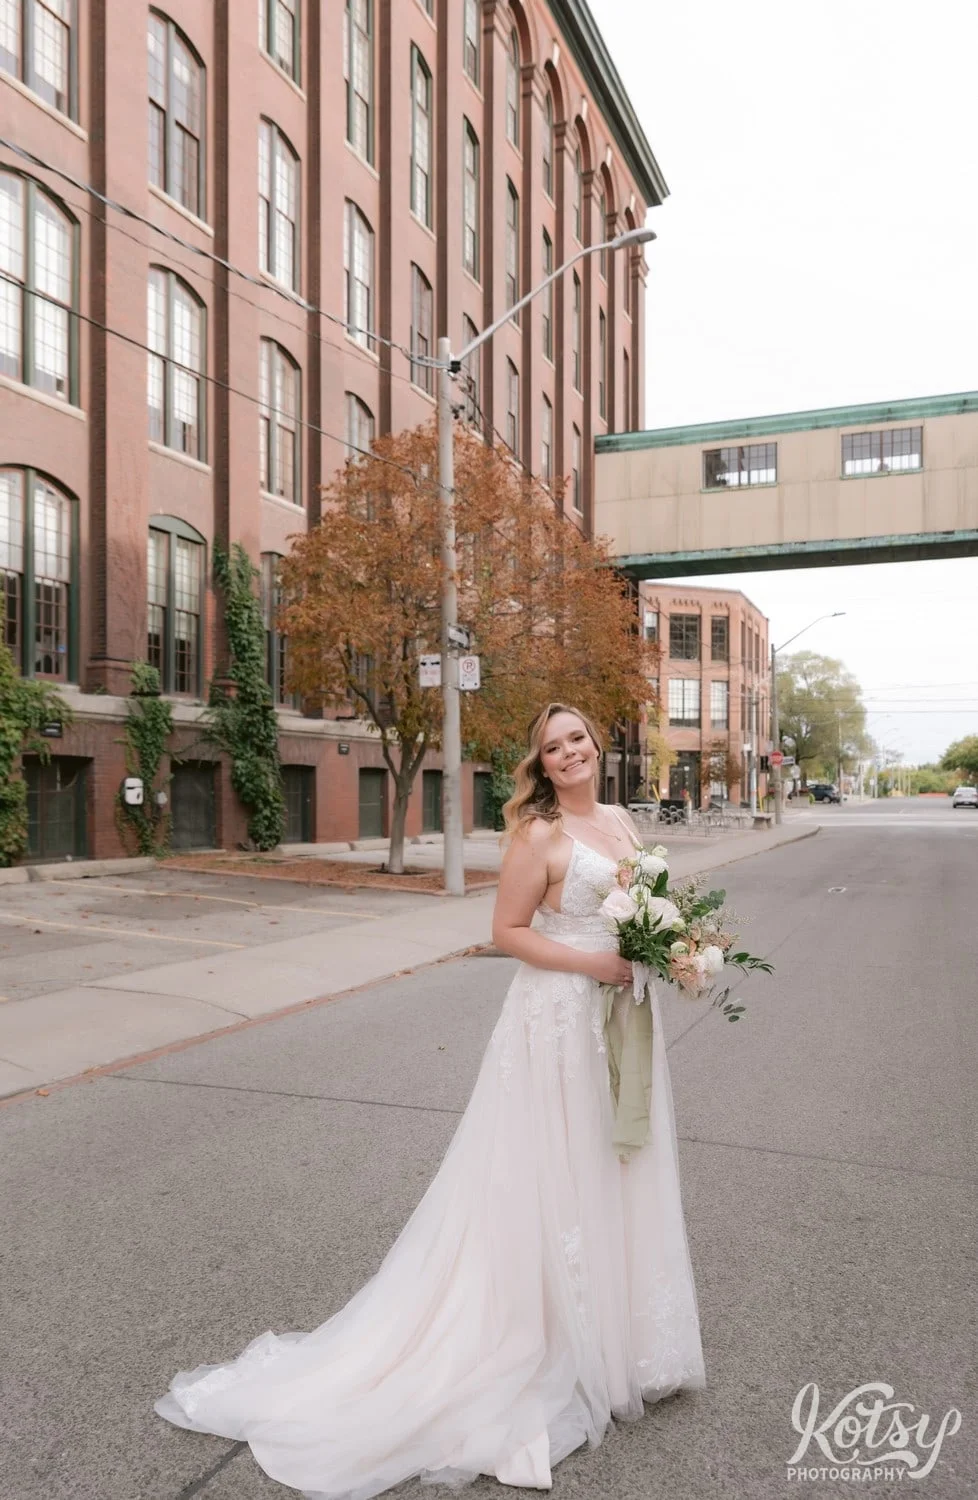 A bride wearing a white bridal gown and holding a bouquet of flowers poses in the middle of an empty road with the carpet factory and pedestrian bridge in the background in Toronto Canada